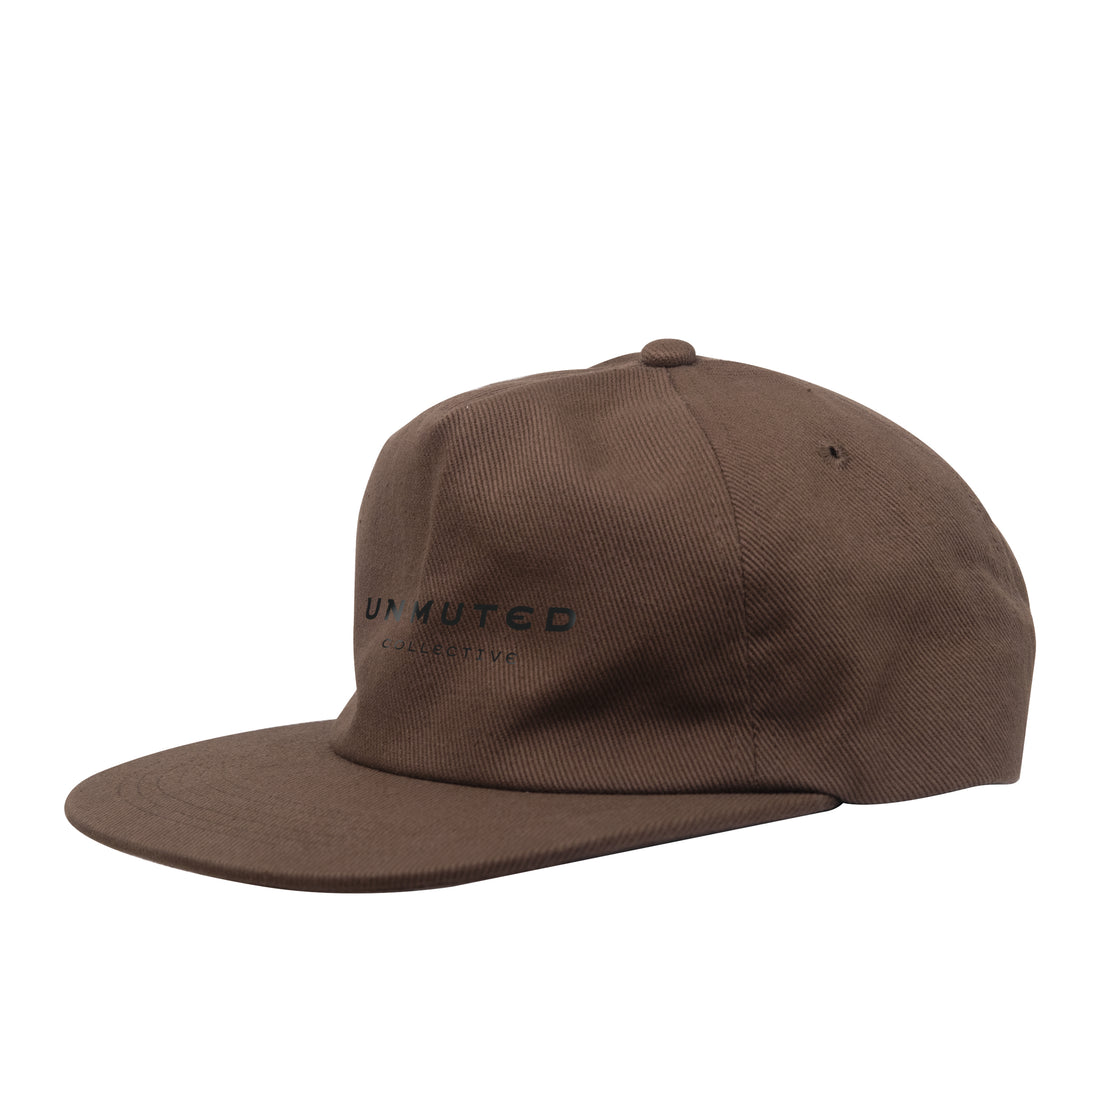 Key West Brown - Unstructured Snapback